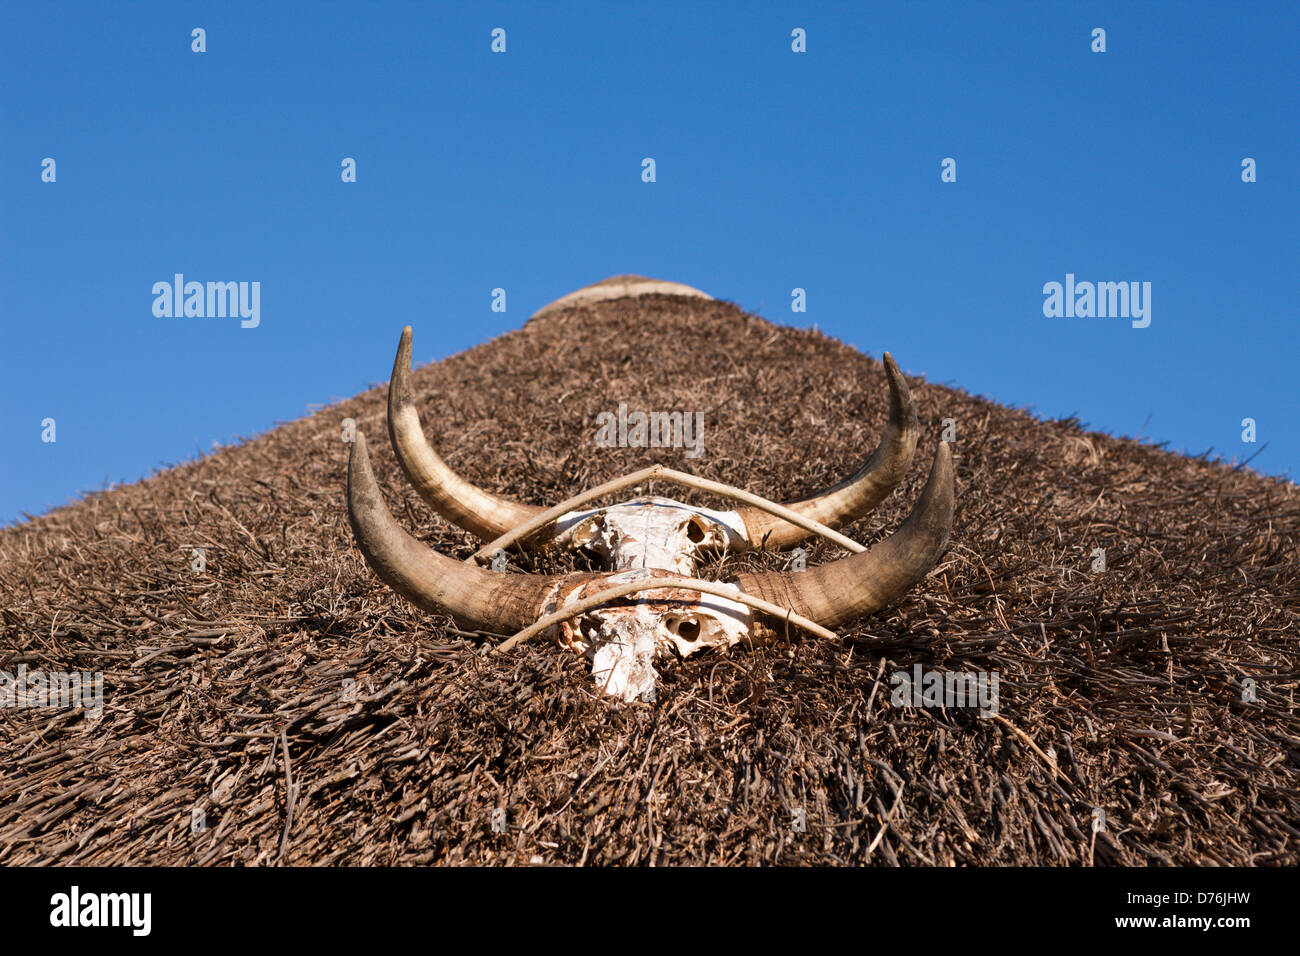 Roof of Hut in Xhosa Village, Wild Coast, Eastern Cap, South Africa Stock Photo